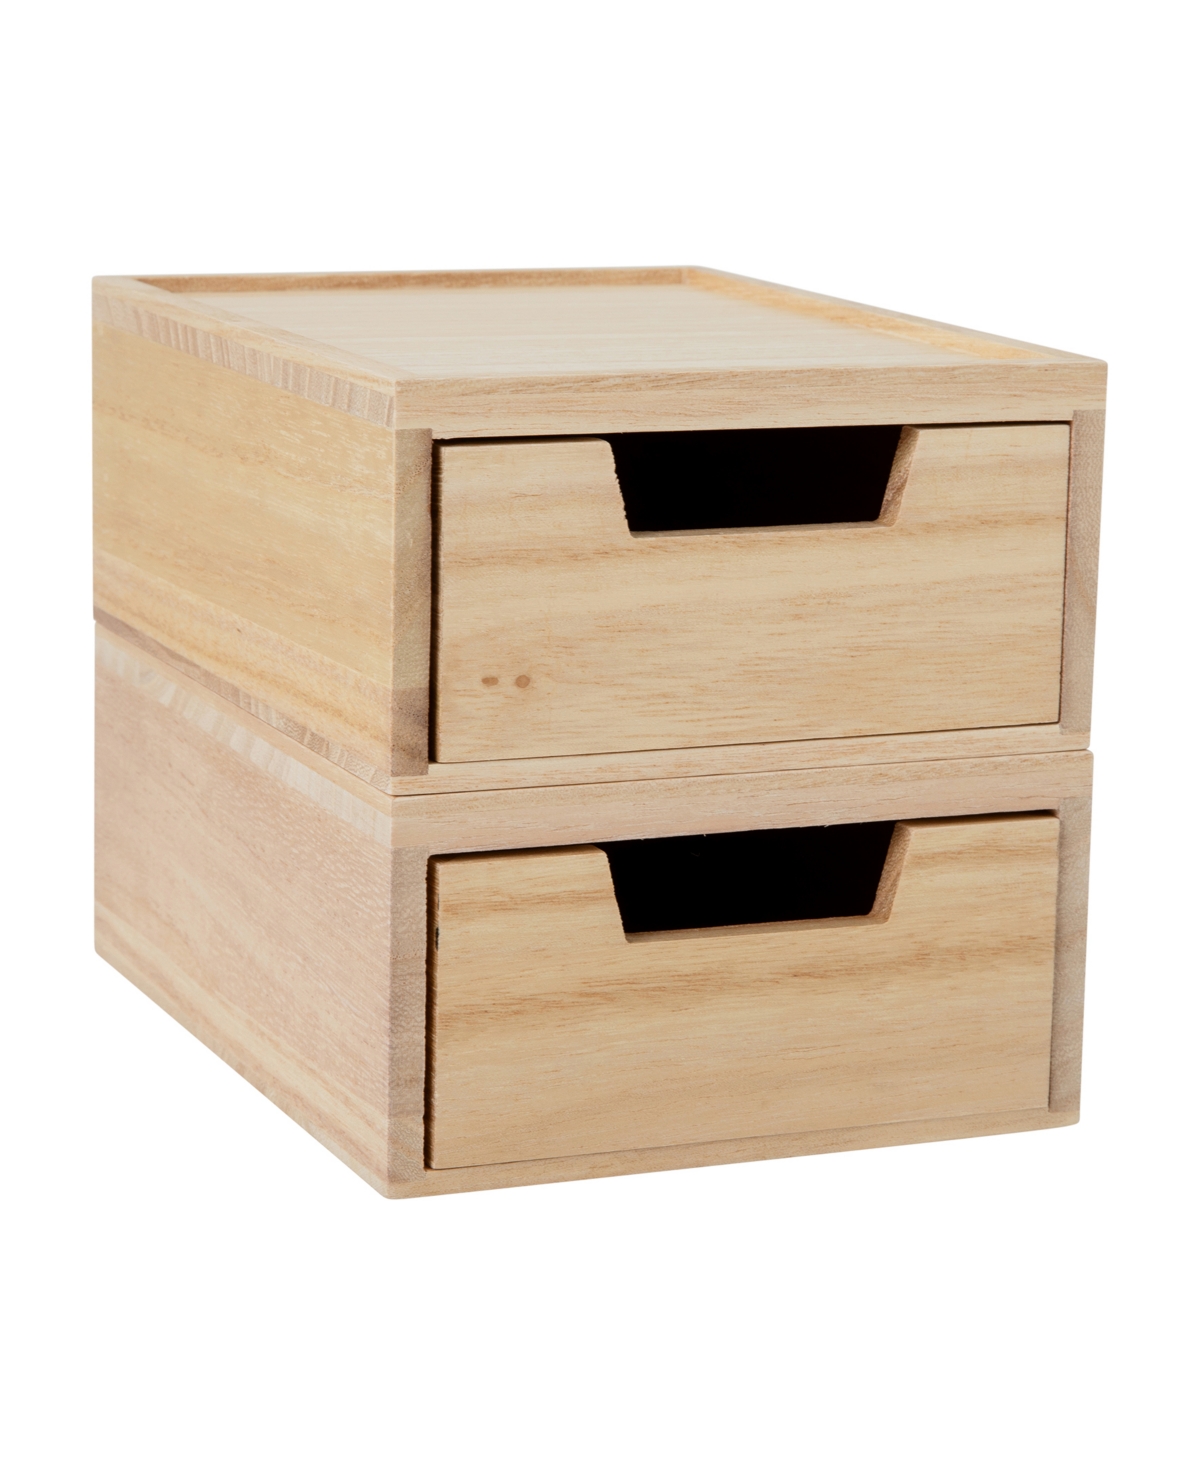 Weston 2 Compartments Stackable Paulownia Wood Boxes with Drawers, Office Desktop Organizers - Light Natural